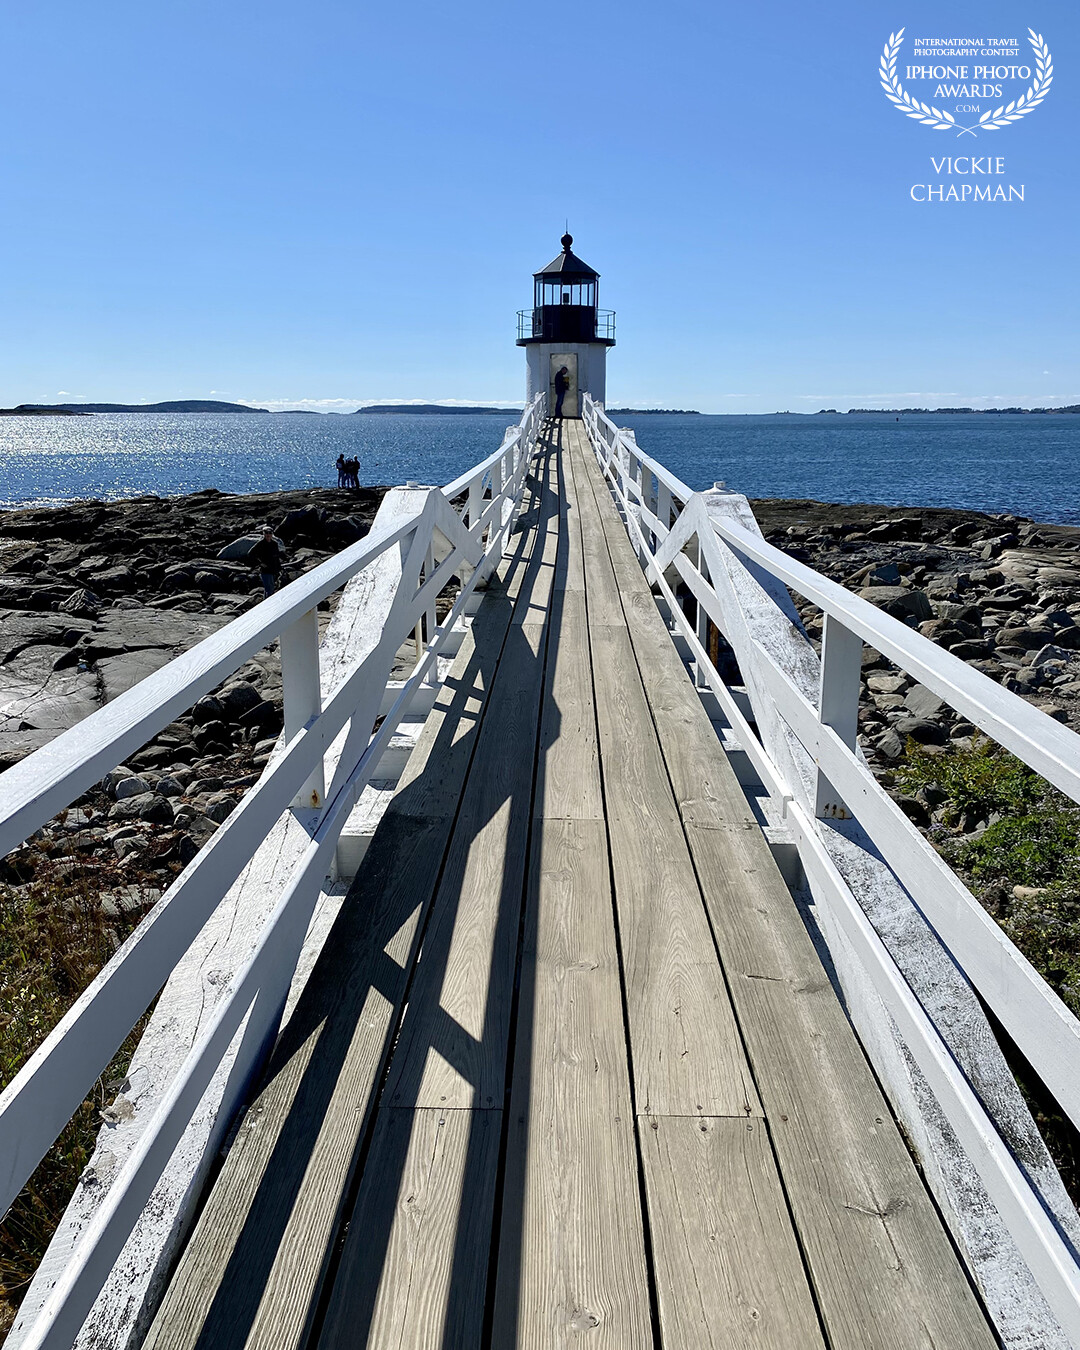 The Marshall Point Lighthouse gave me some wonderful leading lines. I really loved how the shadows made the white railings pop!!